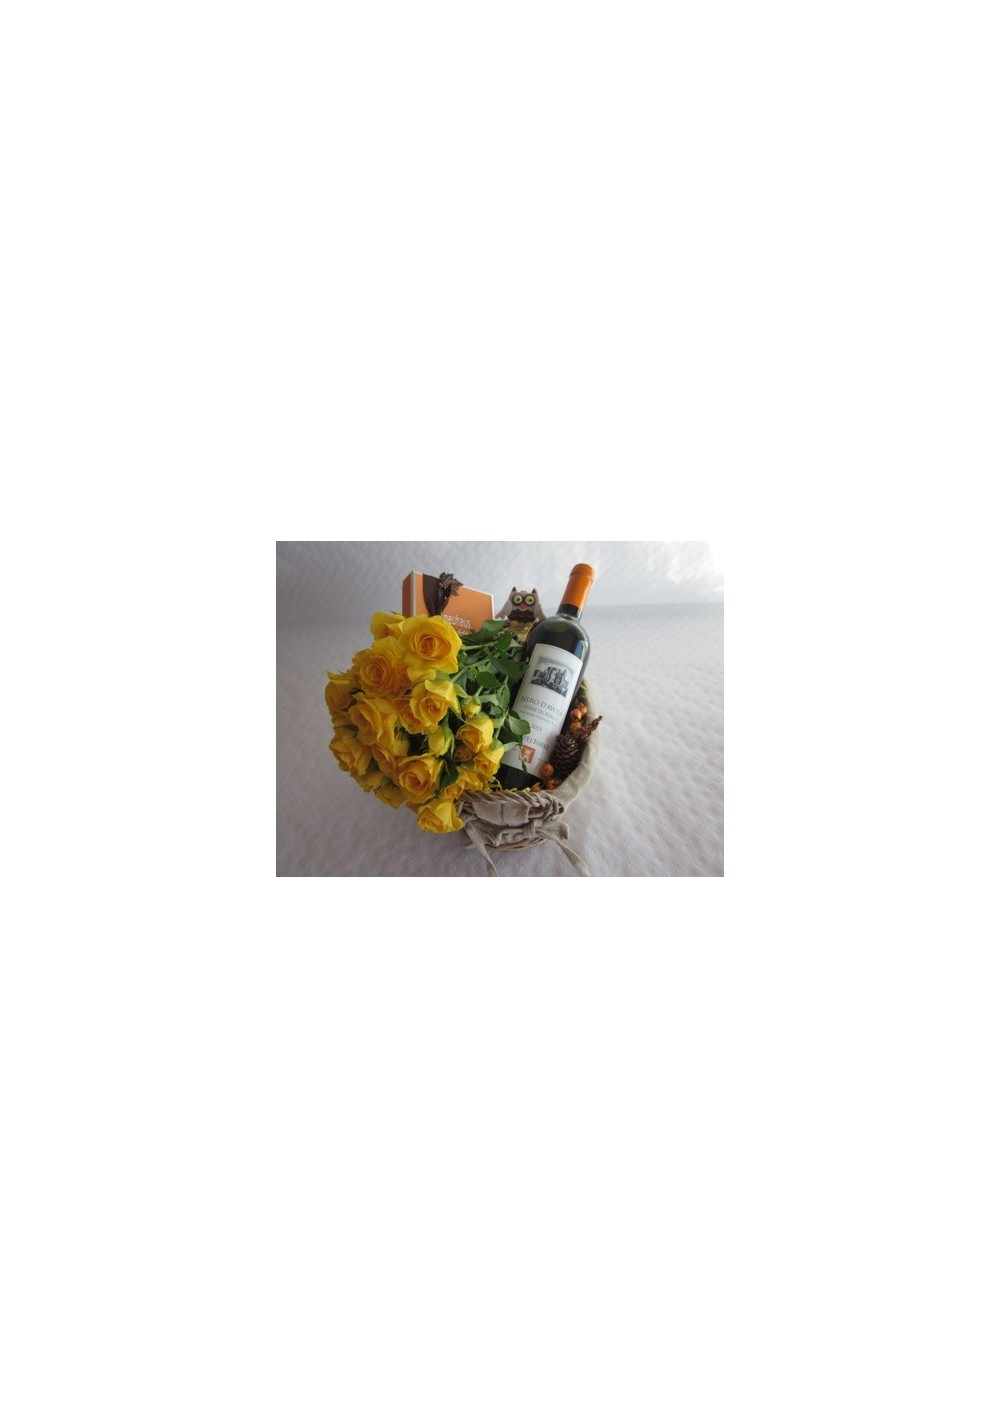 Gift basket with colorful flowers